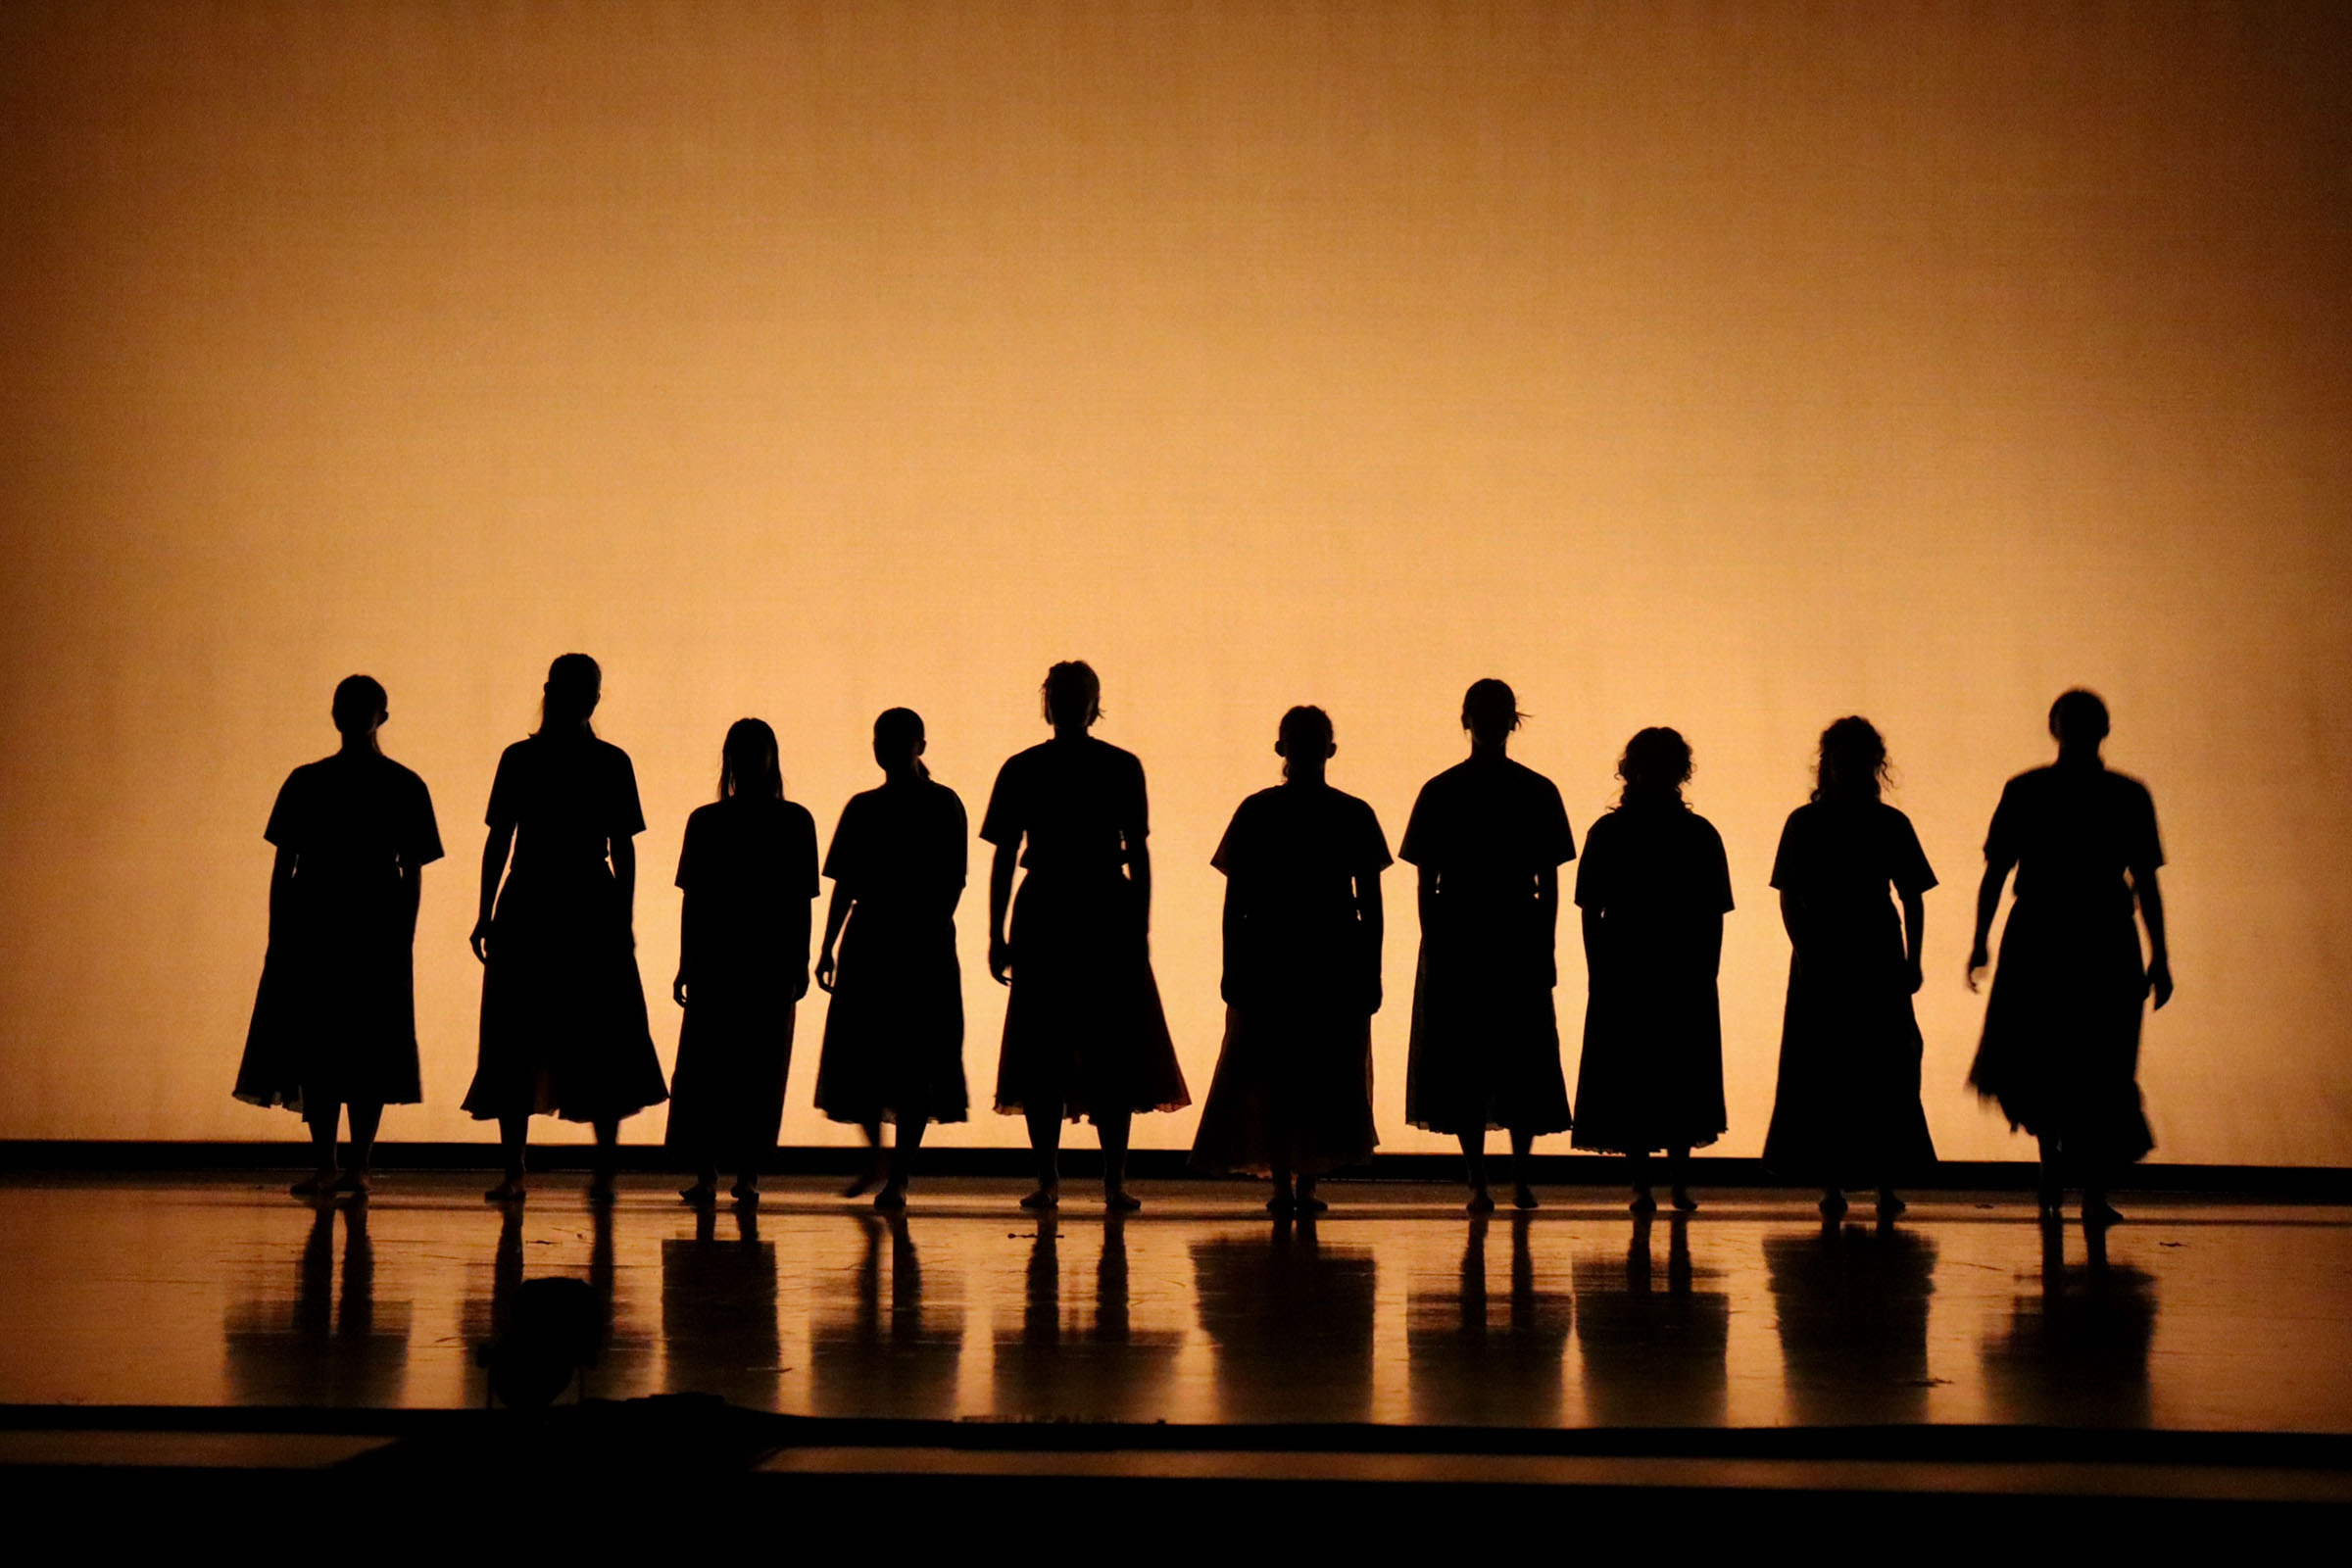 Silhouette of a line of people on a stage with a light orange glowing background.